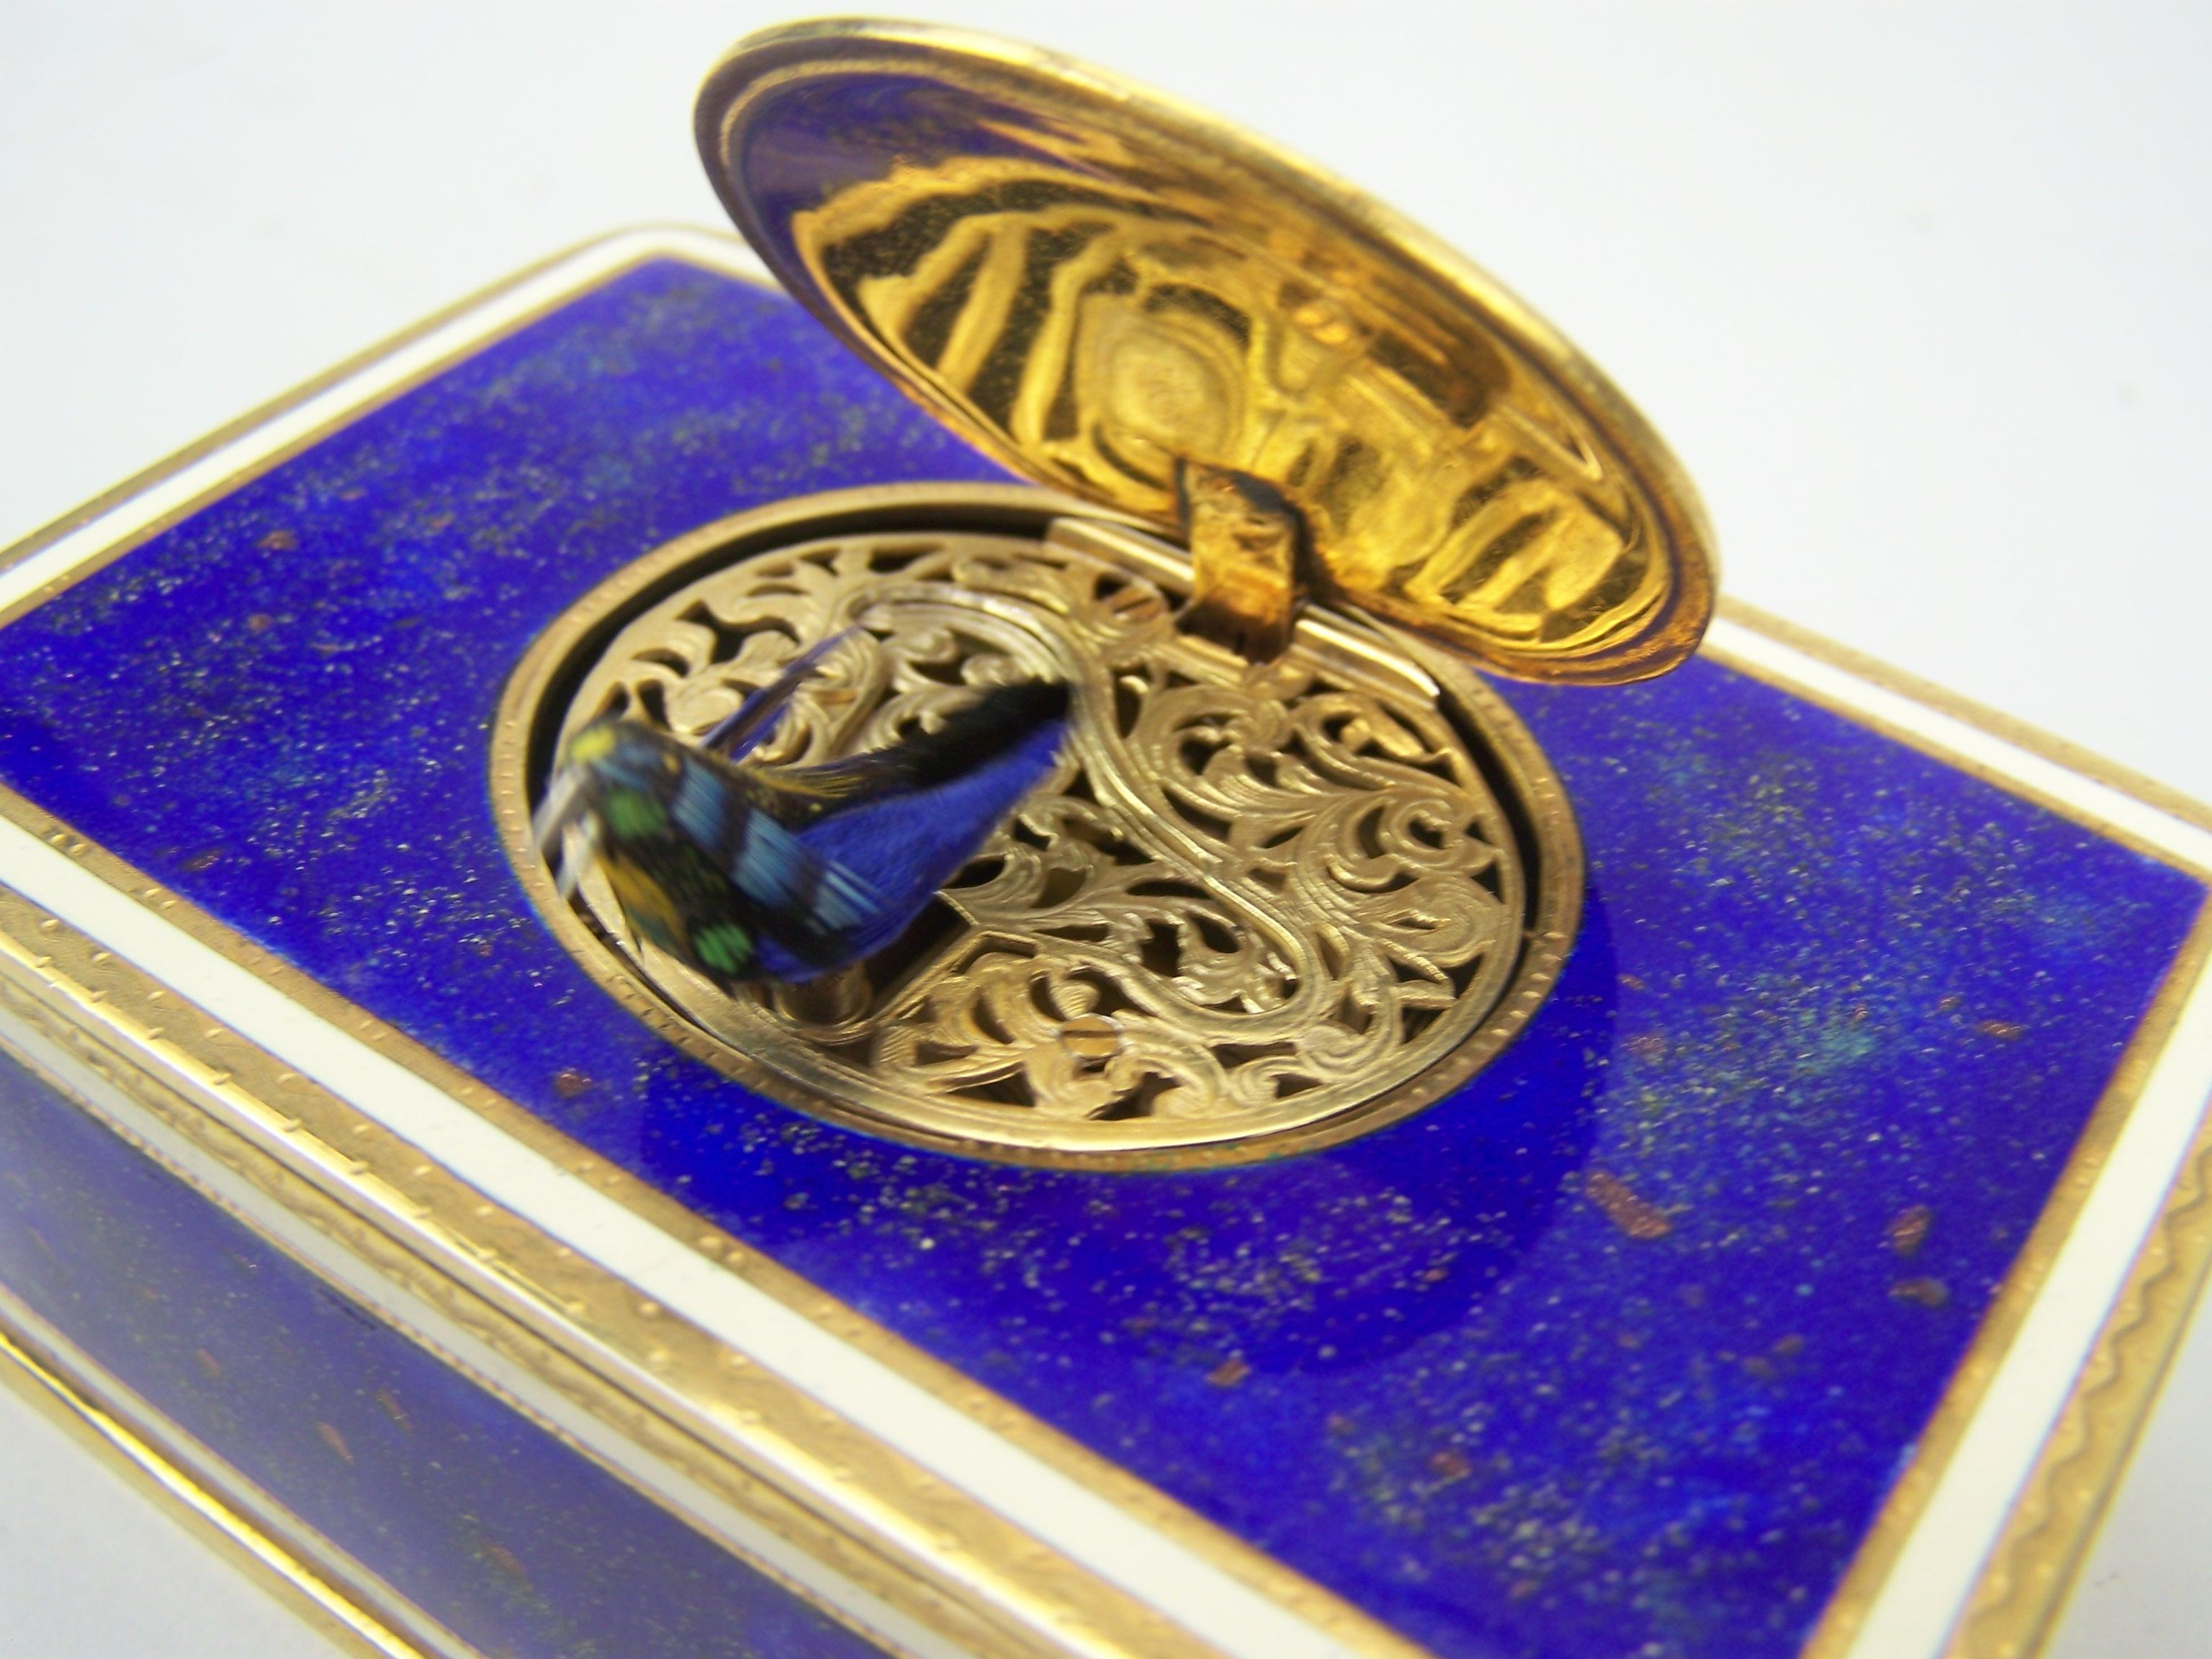 Singing bird box by K Griesbaum in guilded case and blue-goldflaked enamel 6